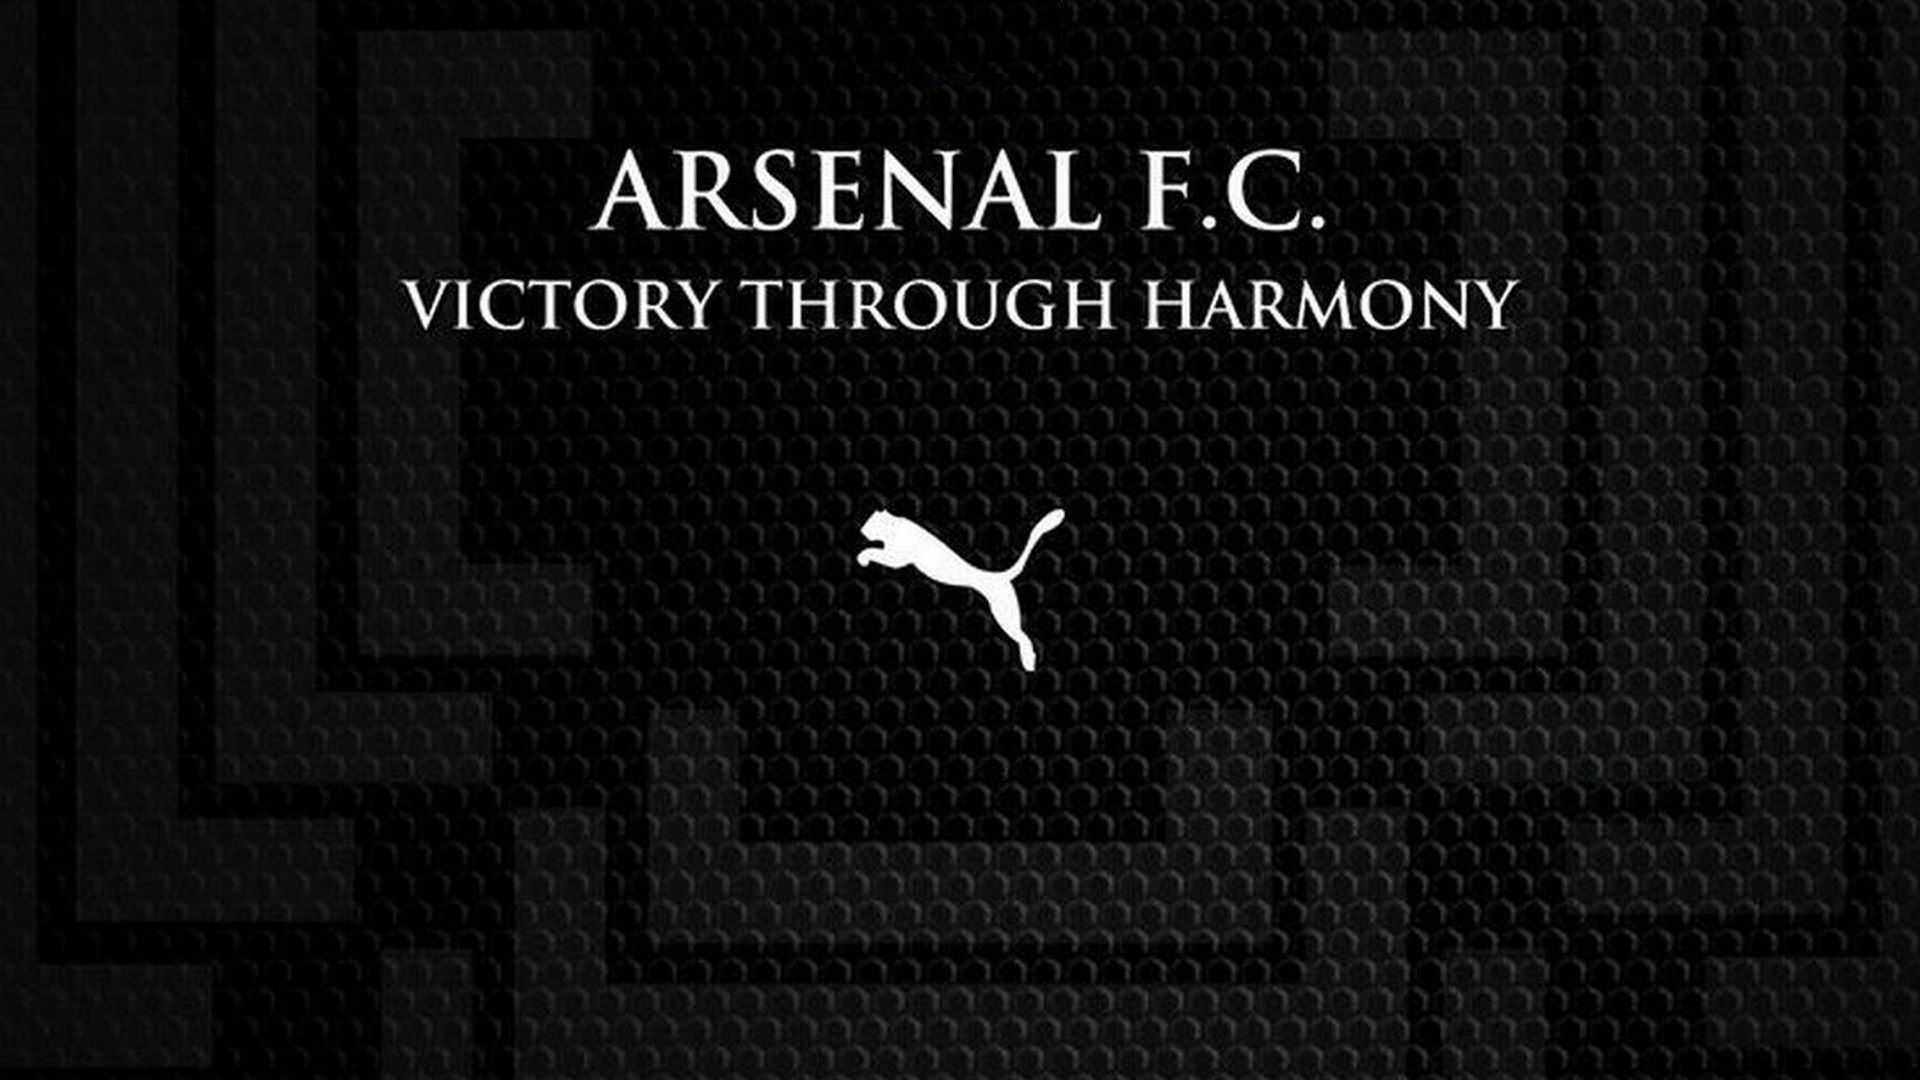 Arsenal FC Wallpaper For Mac with high-resolution 1920x1080 pixel. You can use this wallpaper for your Desktop Computers, Mac Screensavers, Windows Backgrounds, iPhone Wallpapers, Tablet or Android Lock screen and another Mobile device